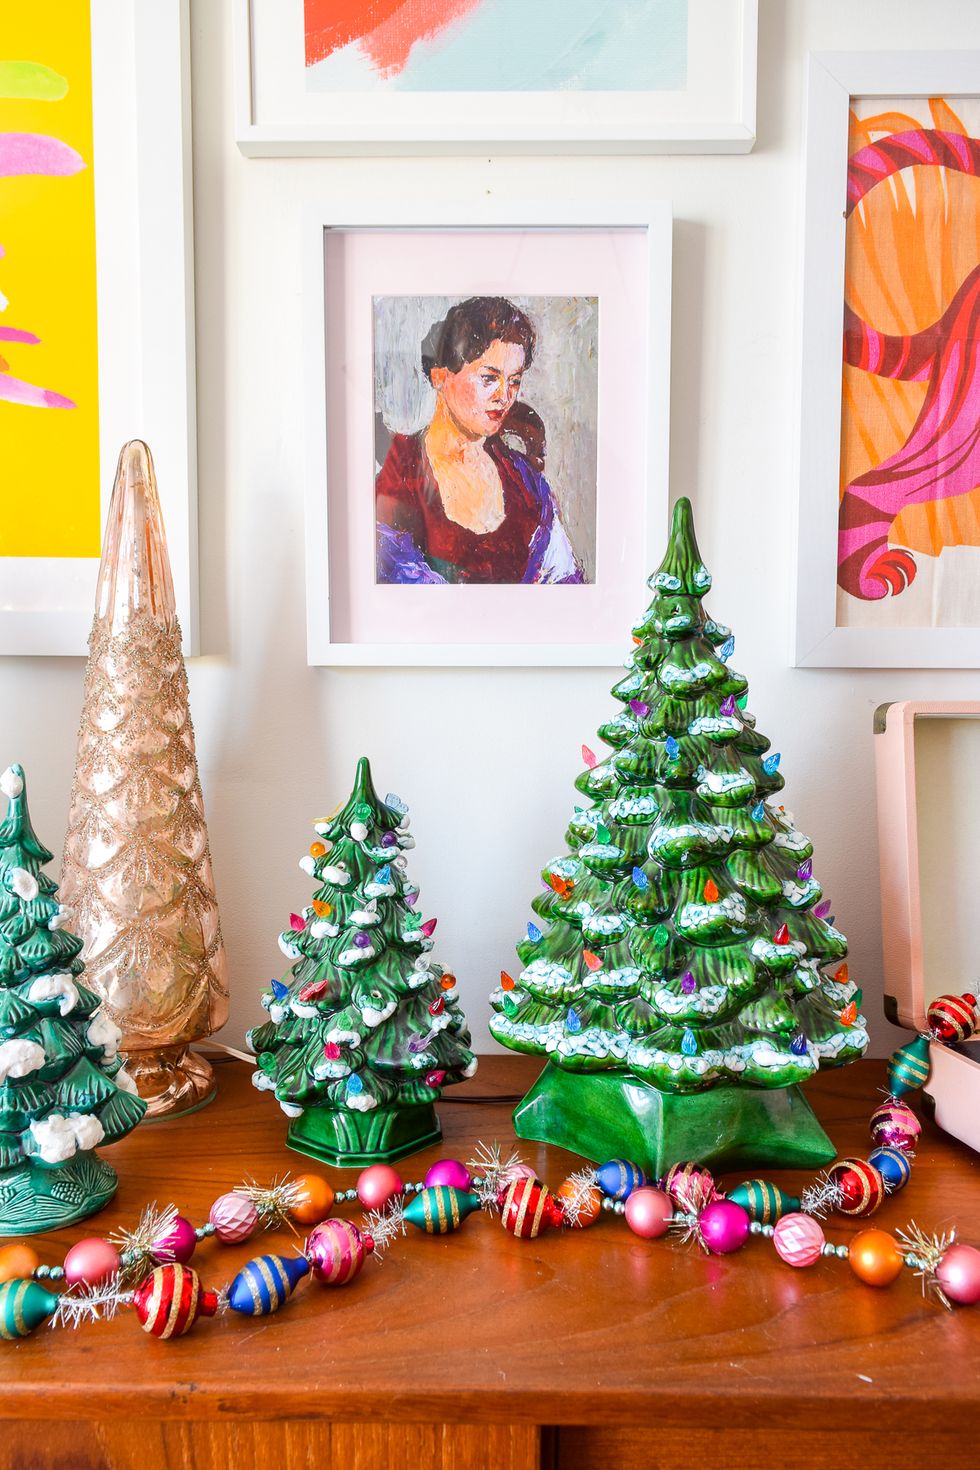 25 Best Vintage and Retro Christmas Decorations in 2023